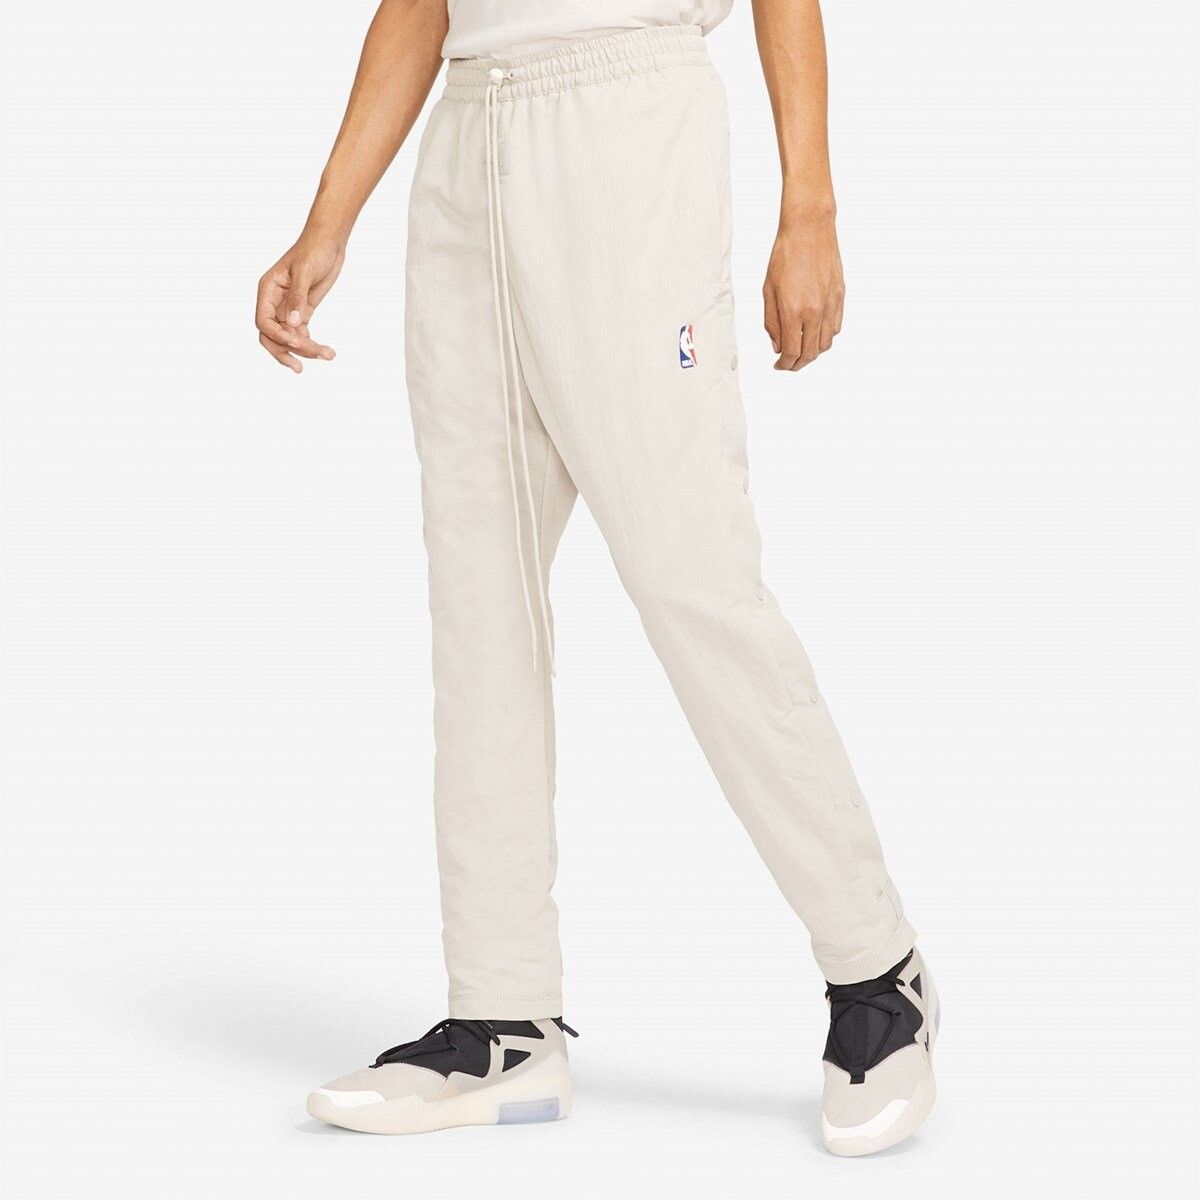 Fear Of God Nike Warm Up Pants | Grailed